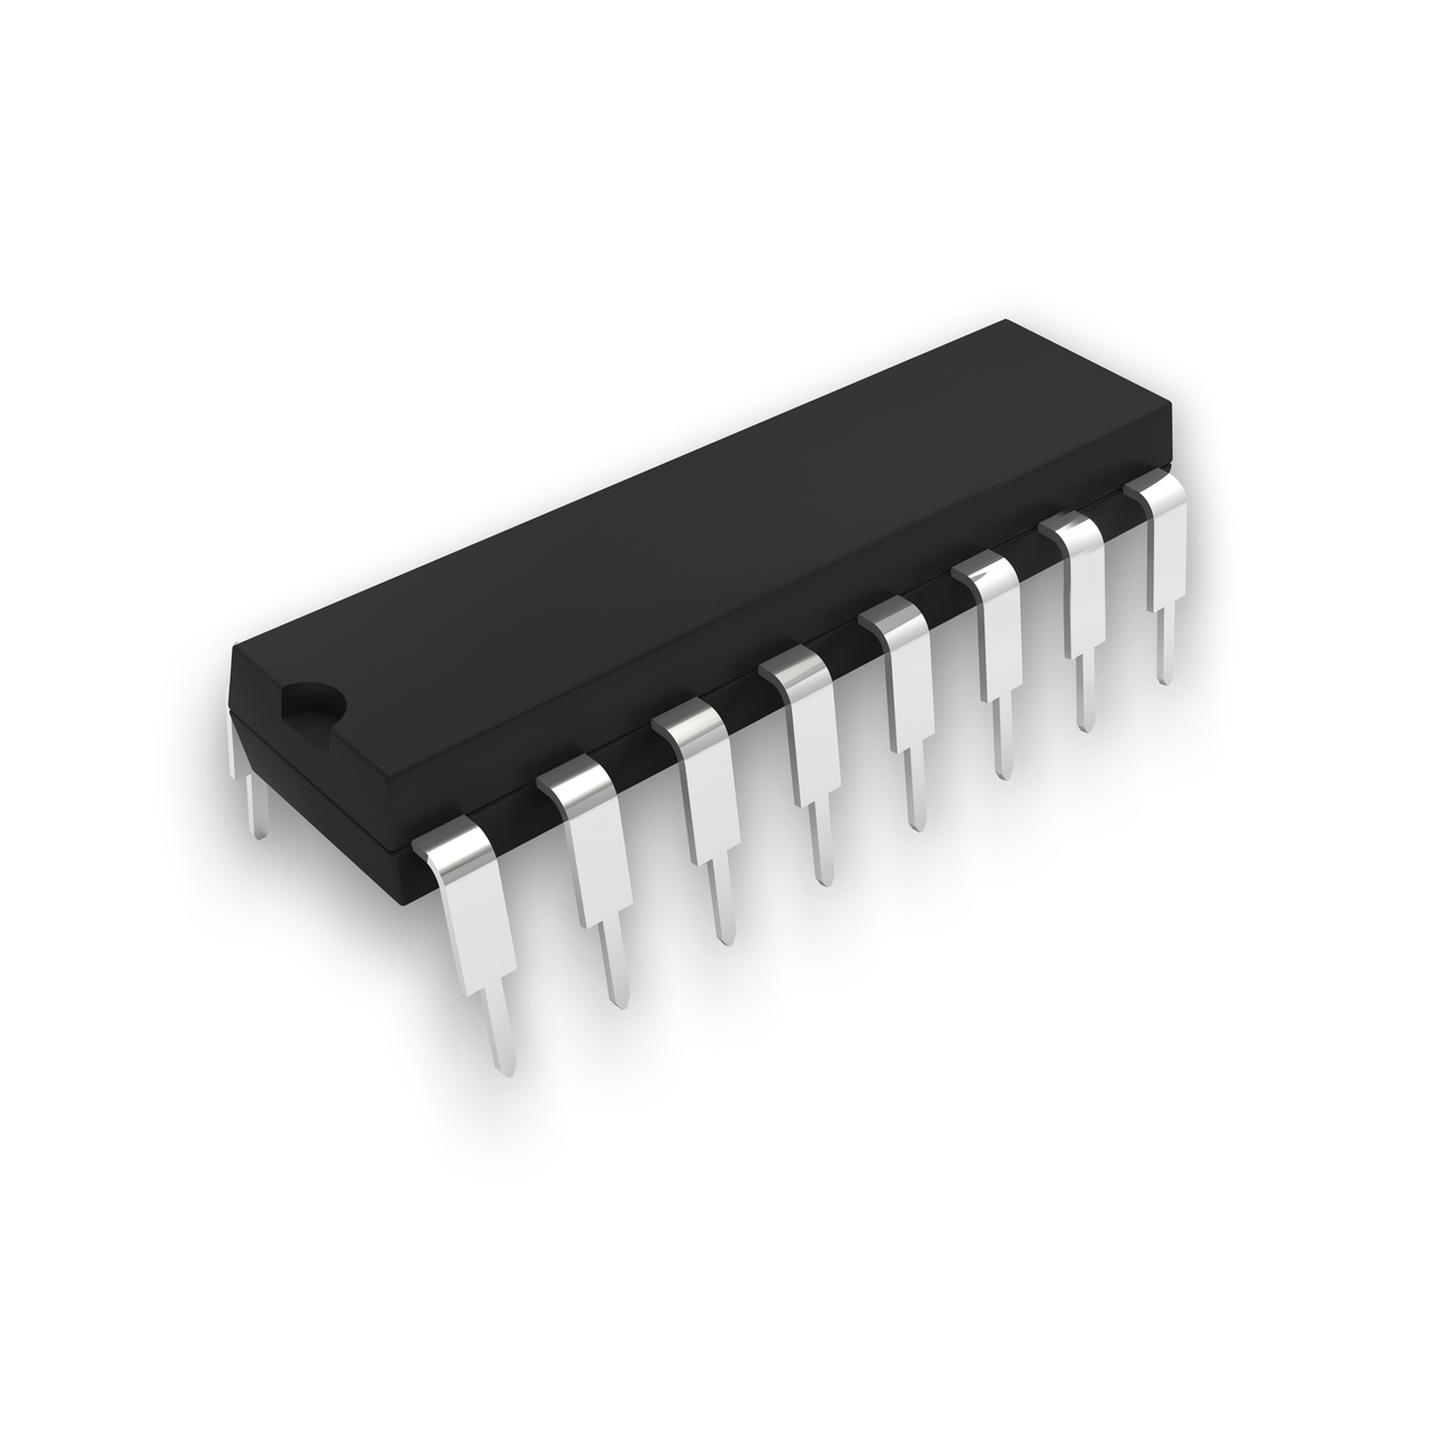 74LS193 Up/Down Counter IC